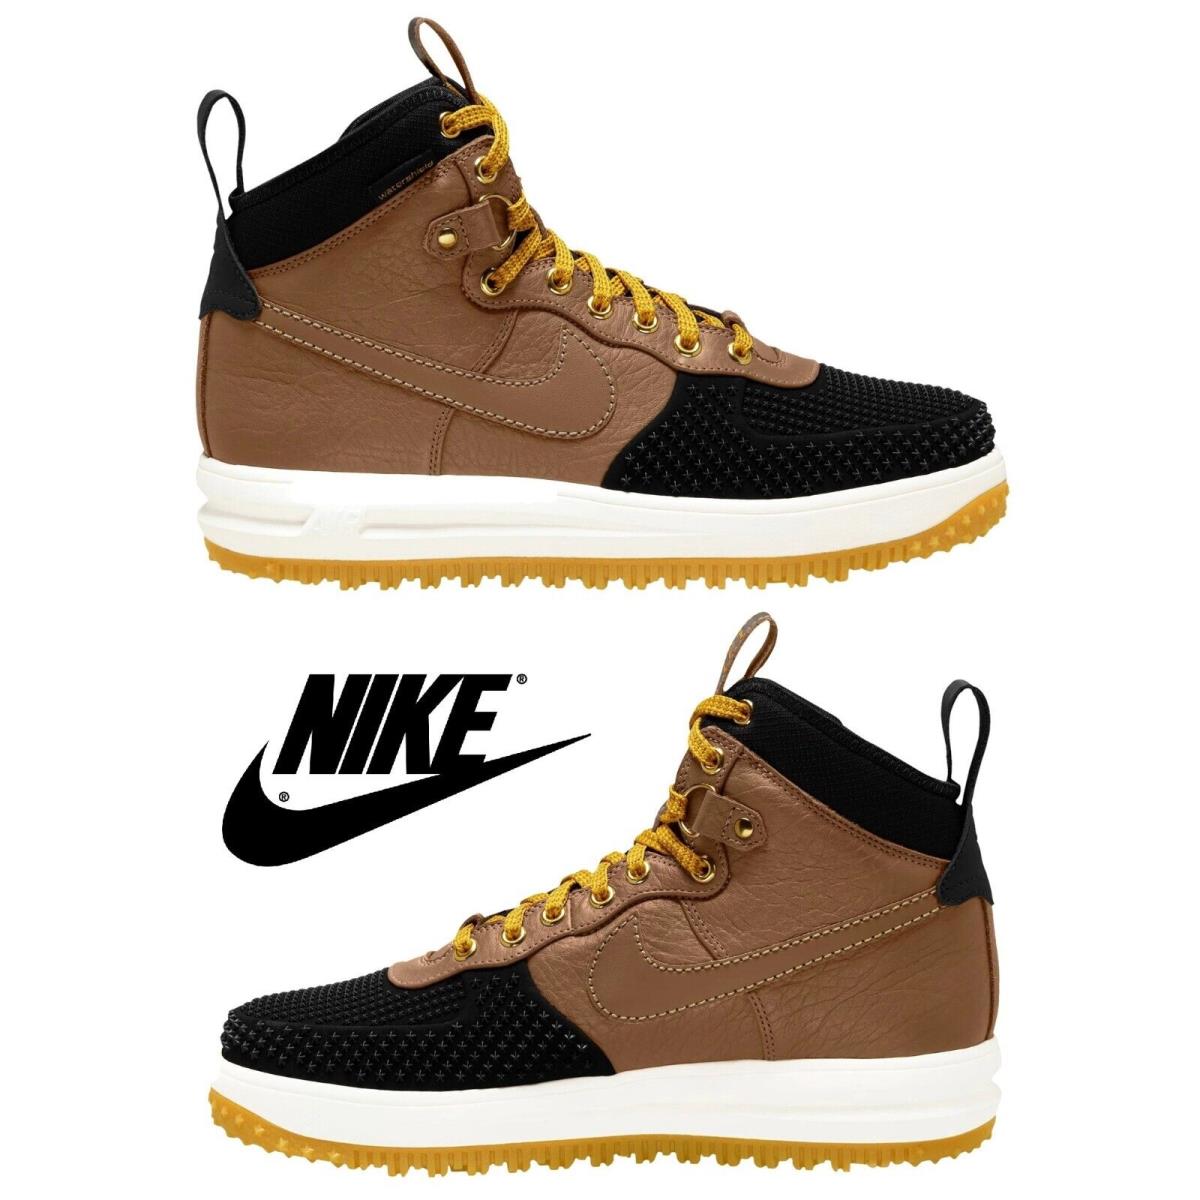 Nike Lunar Force 1 Duckboot Men`s Boots Hiking Water-resistant Leather Shoes